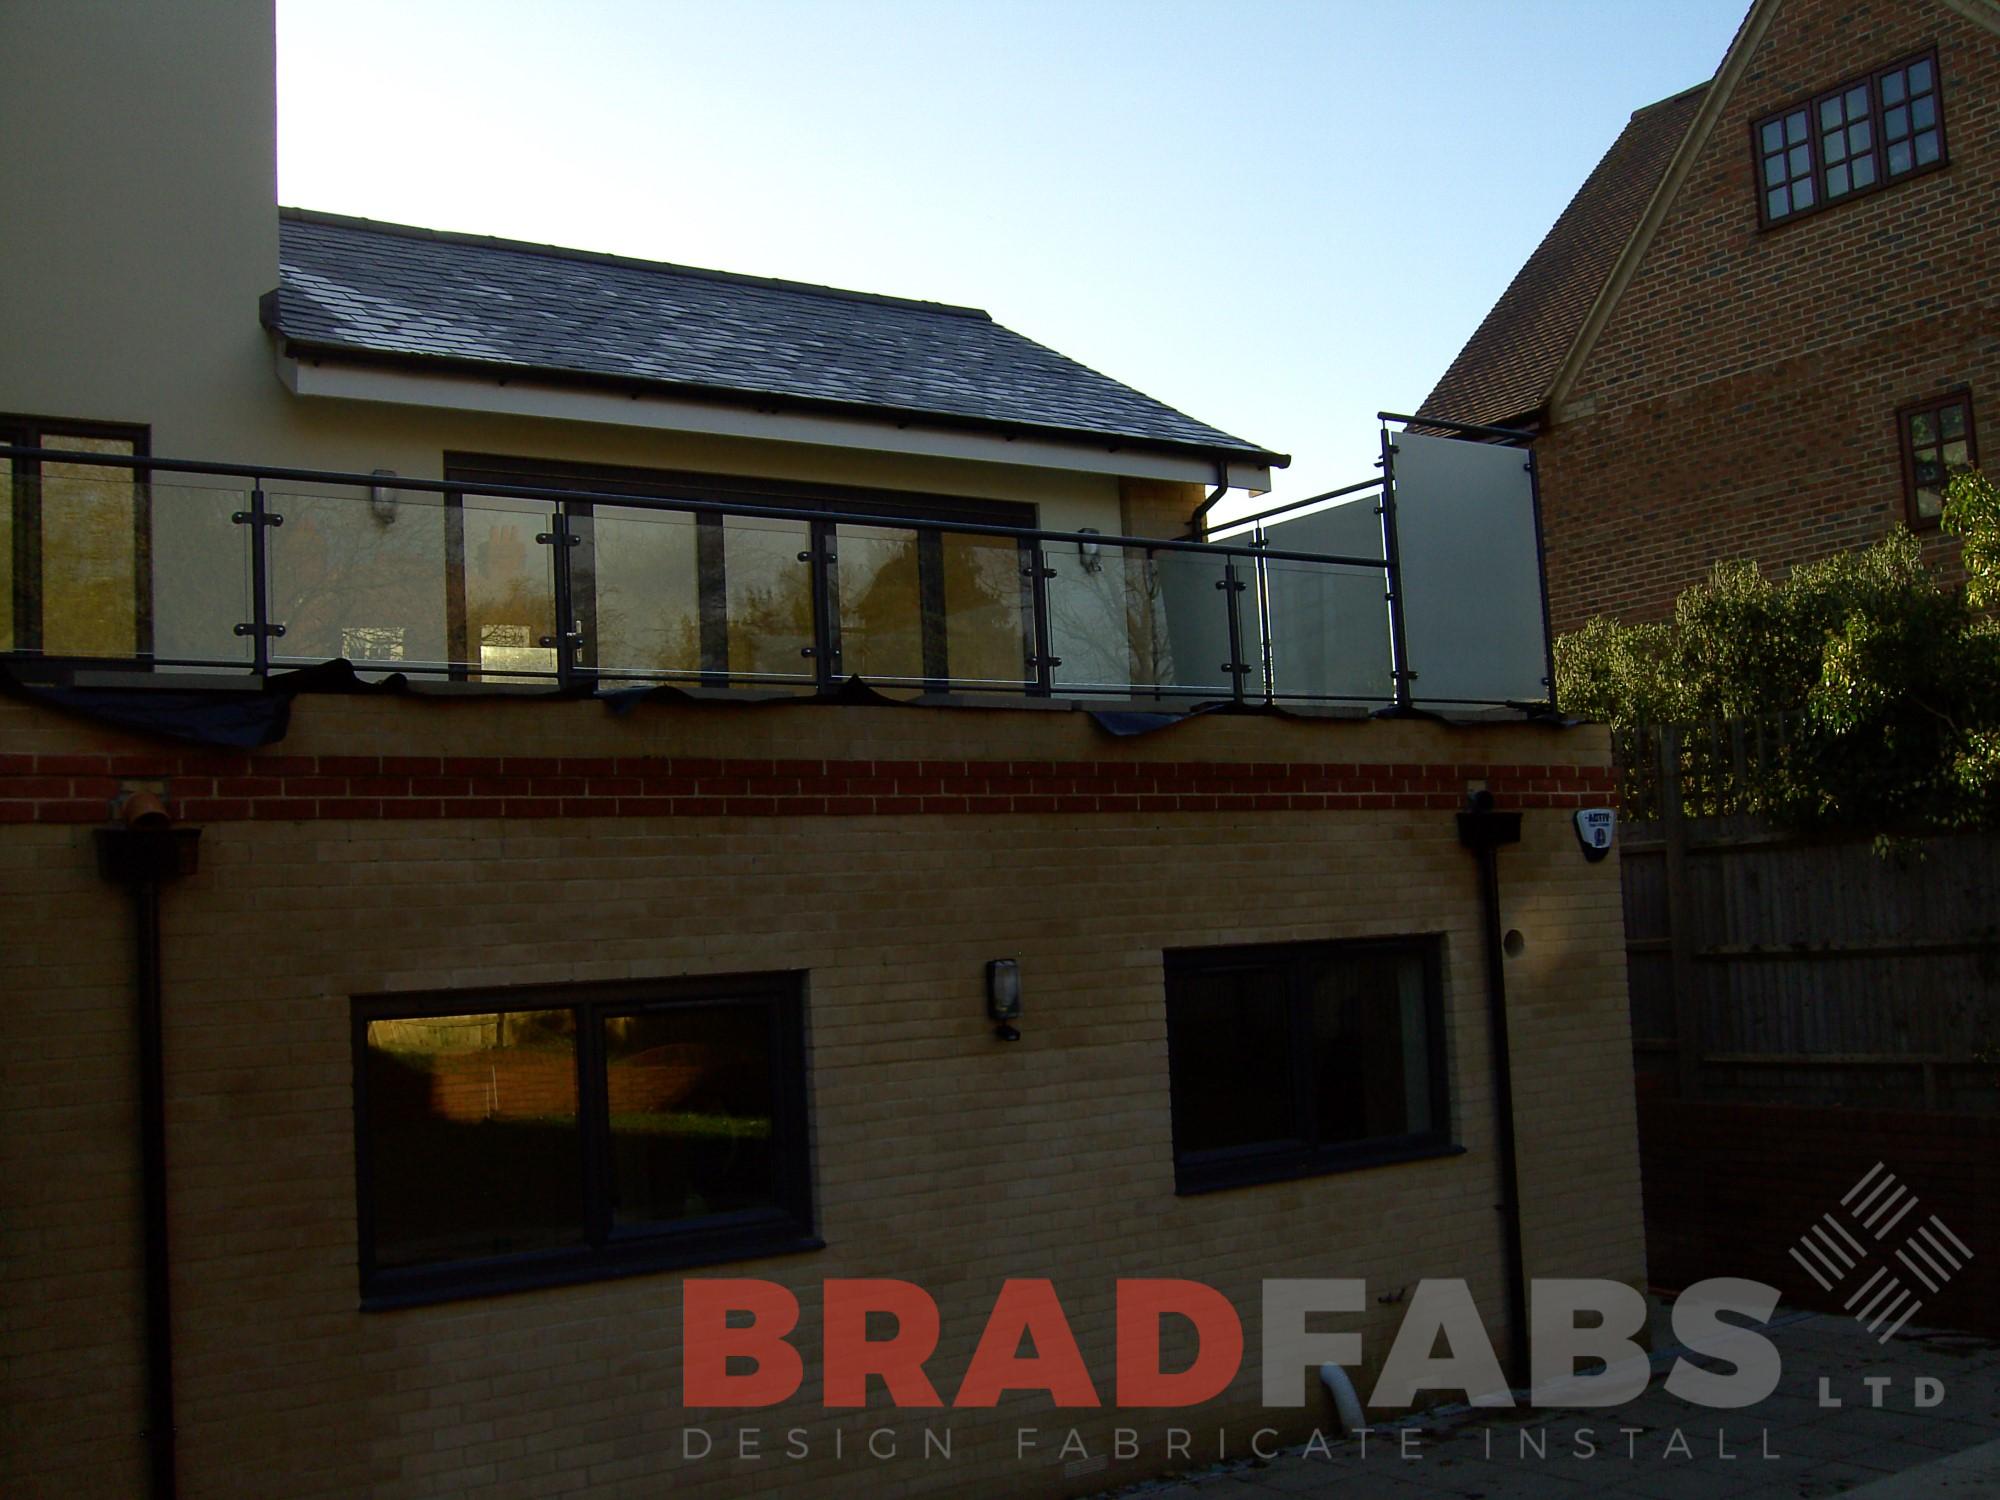 Bradfabs designed and installed this balcony balustrade with privacy glass at a domestic property UK